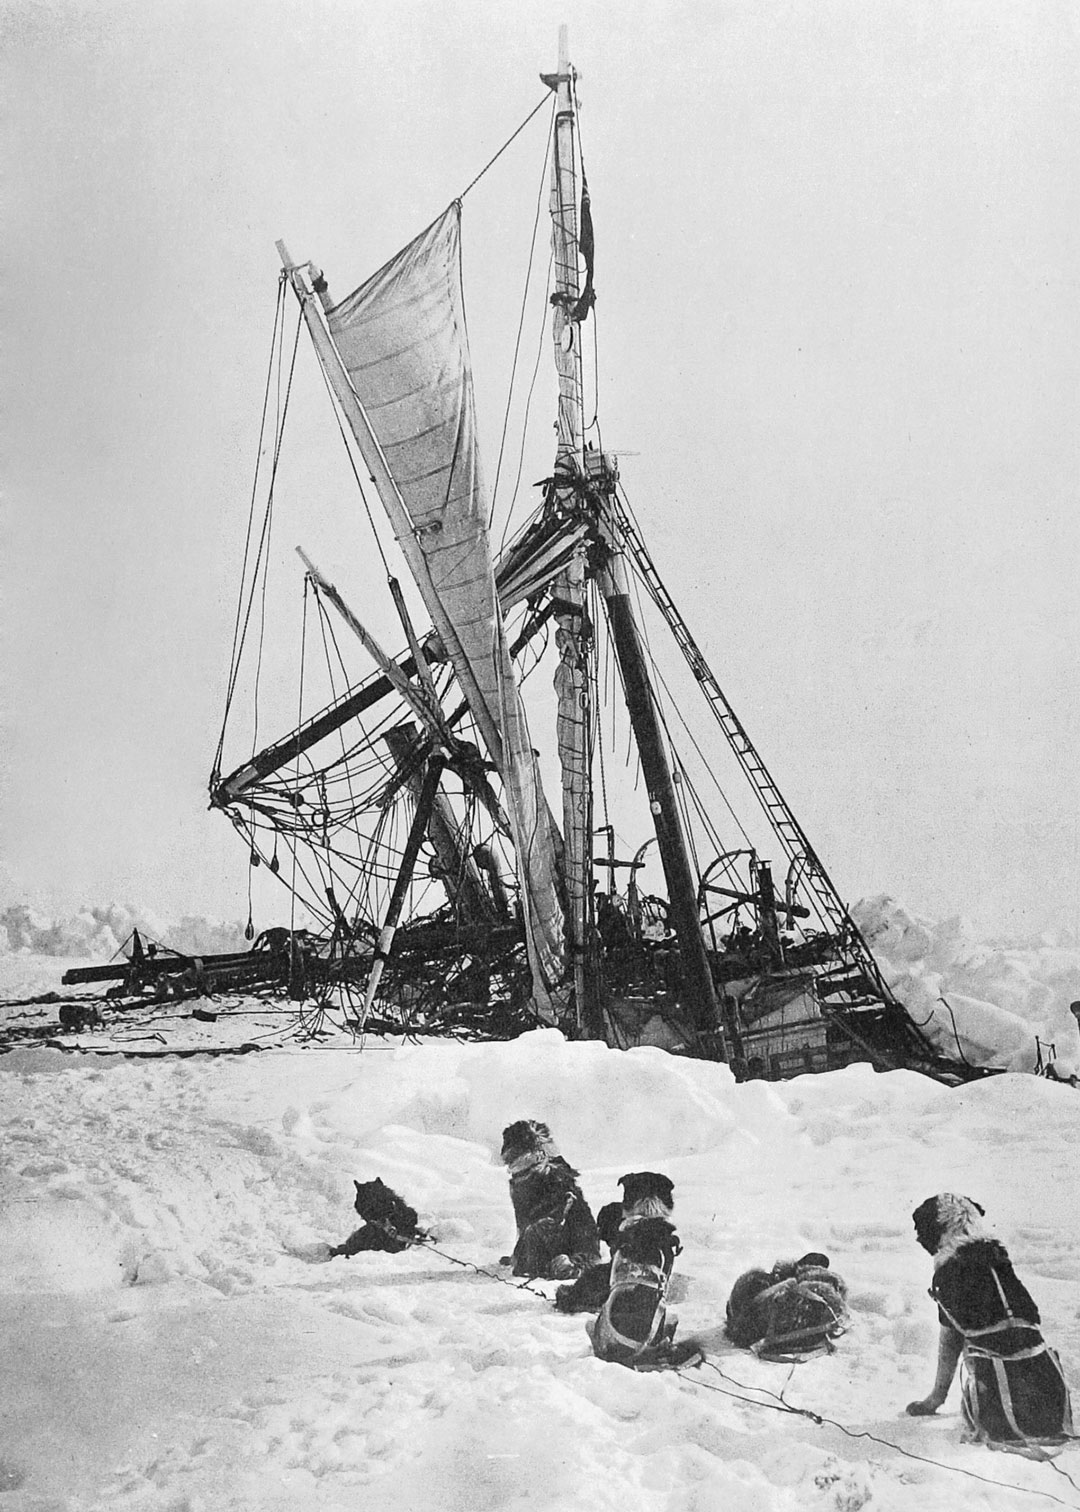 Ice swallows Ernest Shackleton’s ship Endurance  in late 1915 during  a fateful Antarctic expedition.  